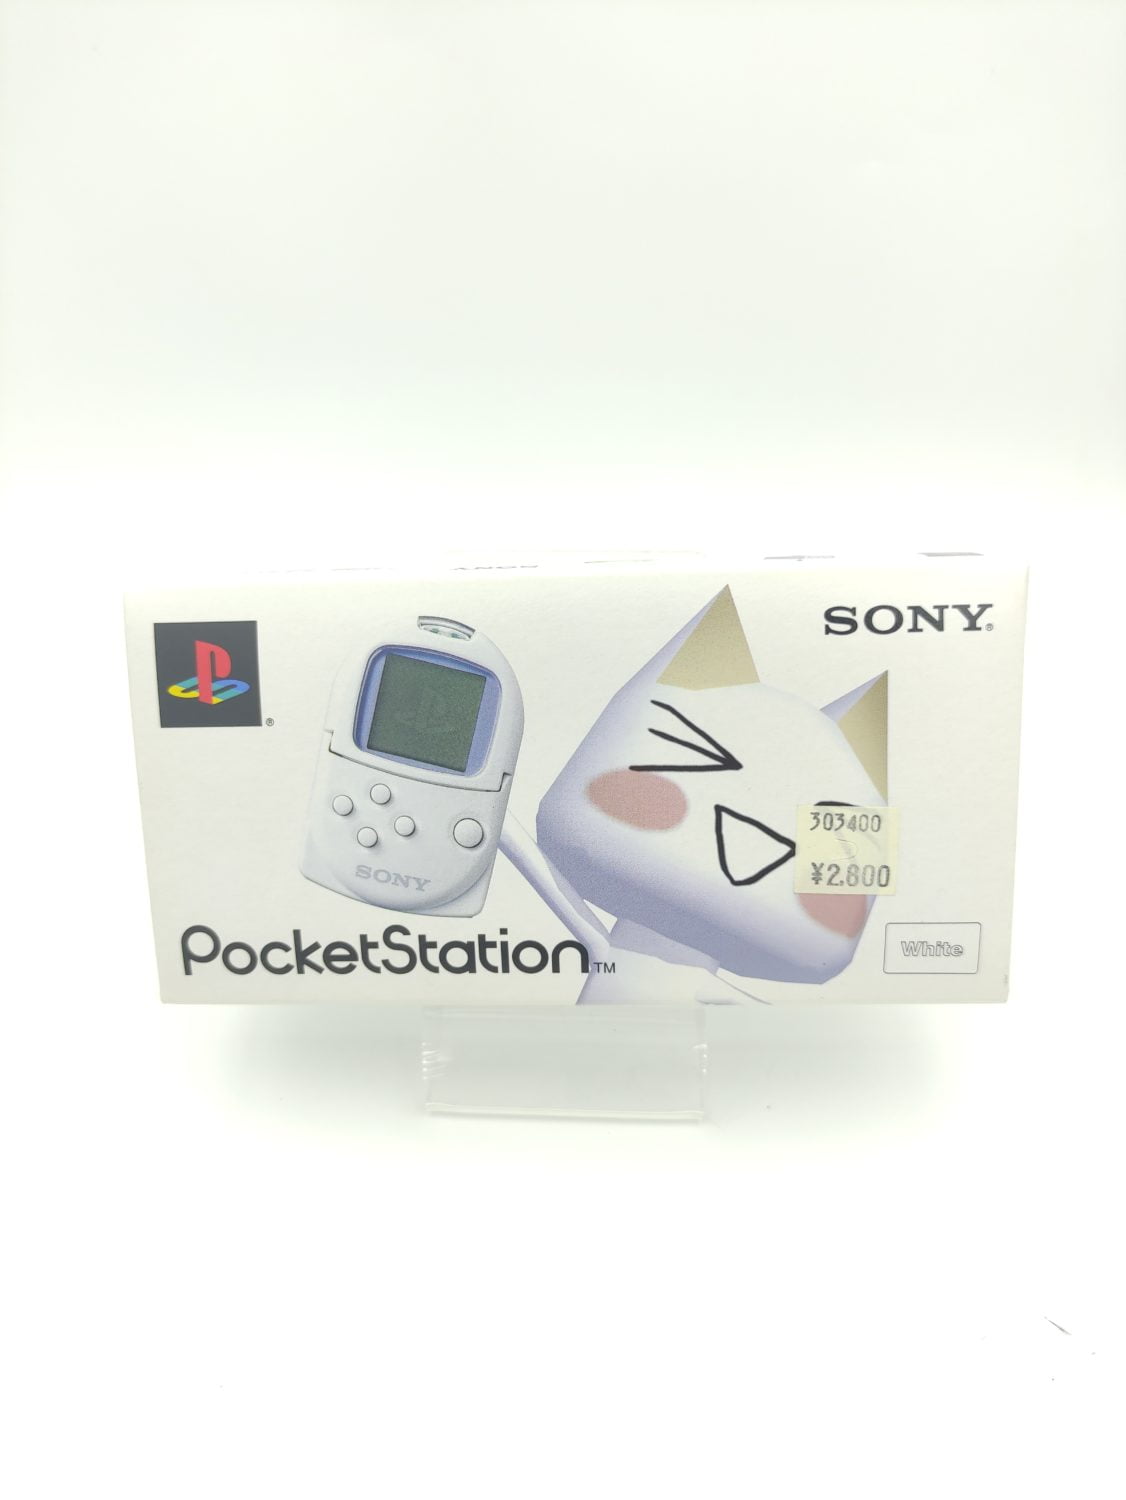 Sony Pocket Station memory card white In Box Manual SCPH-4000 